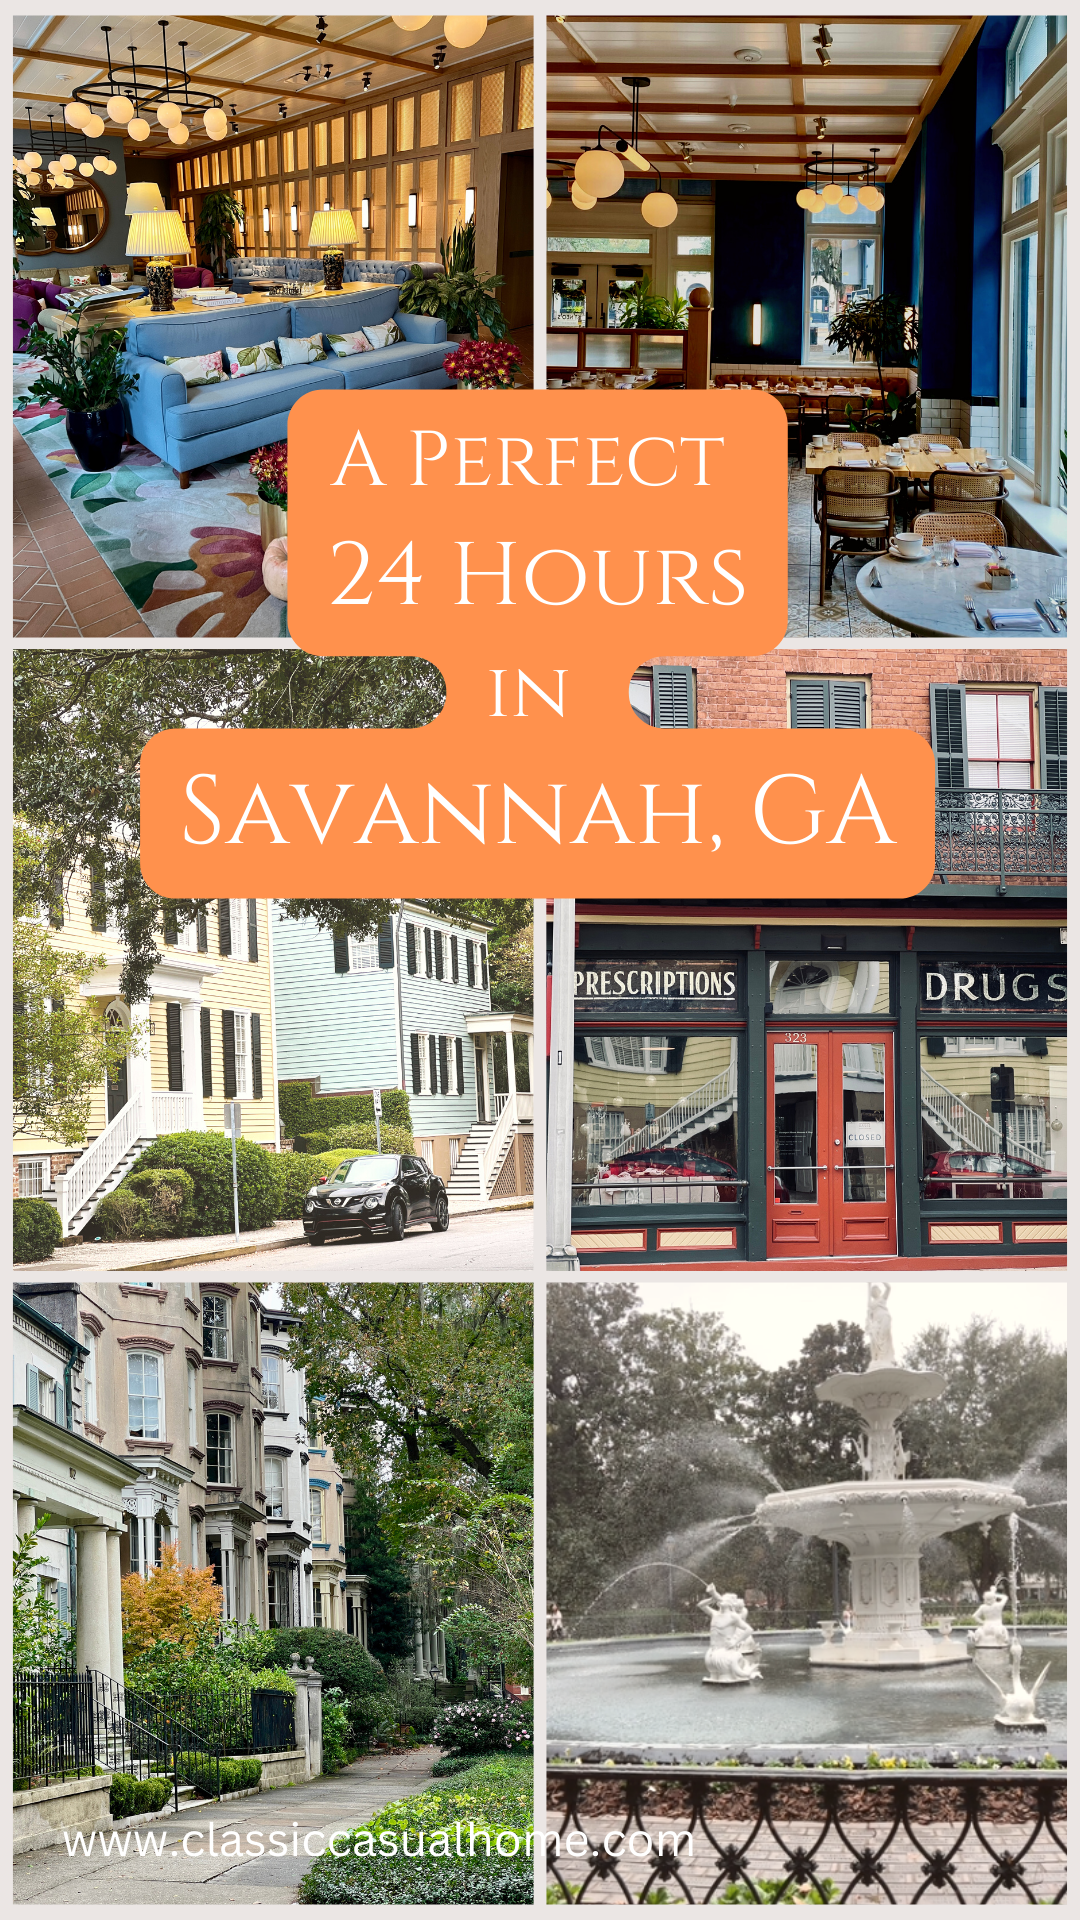 A perfect 24 hours in Savannah